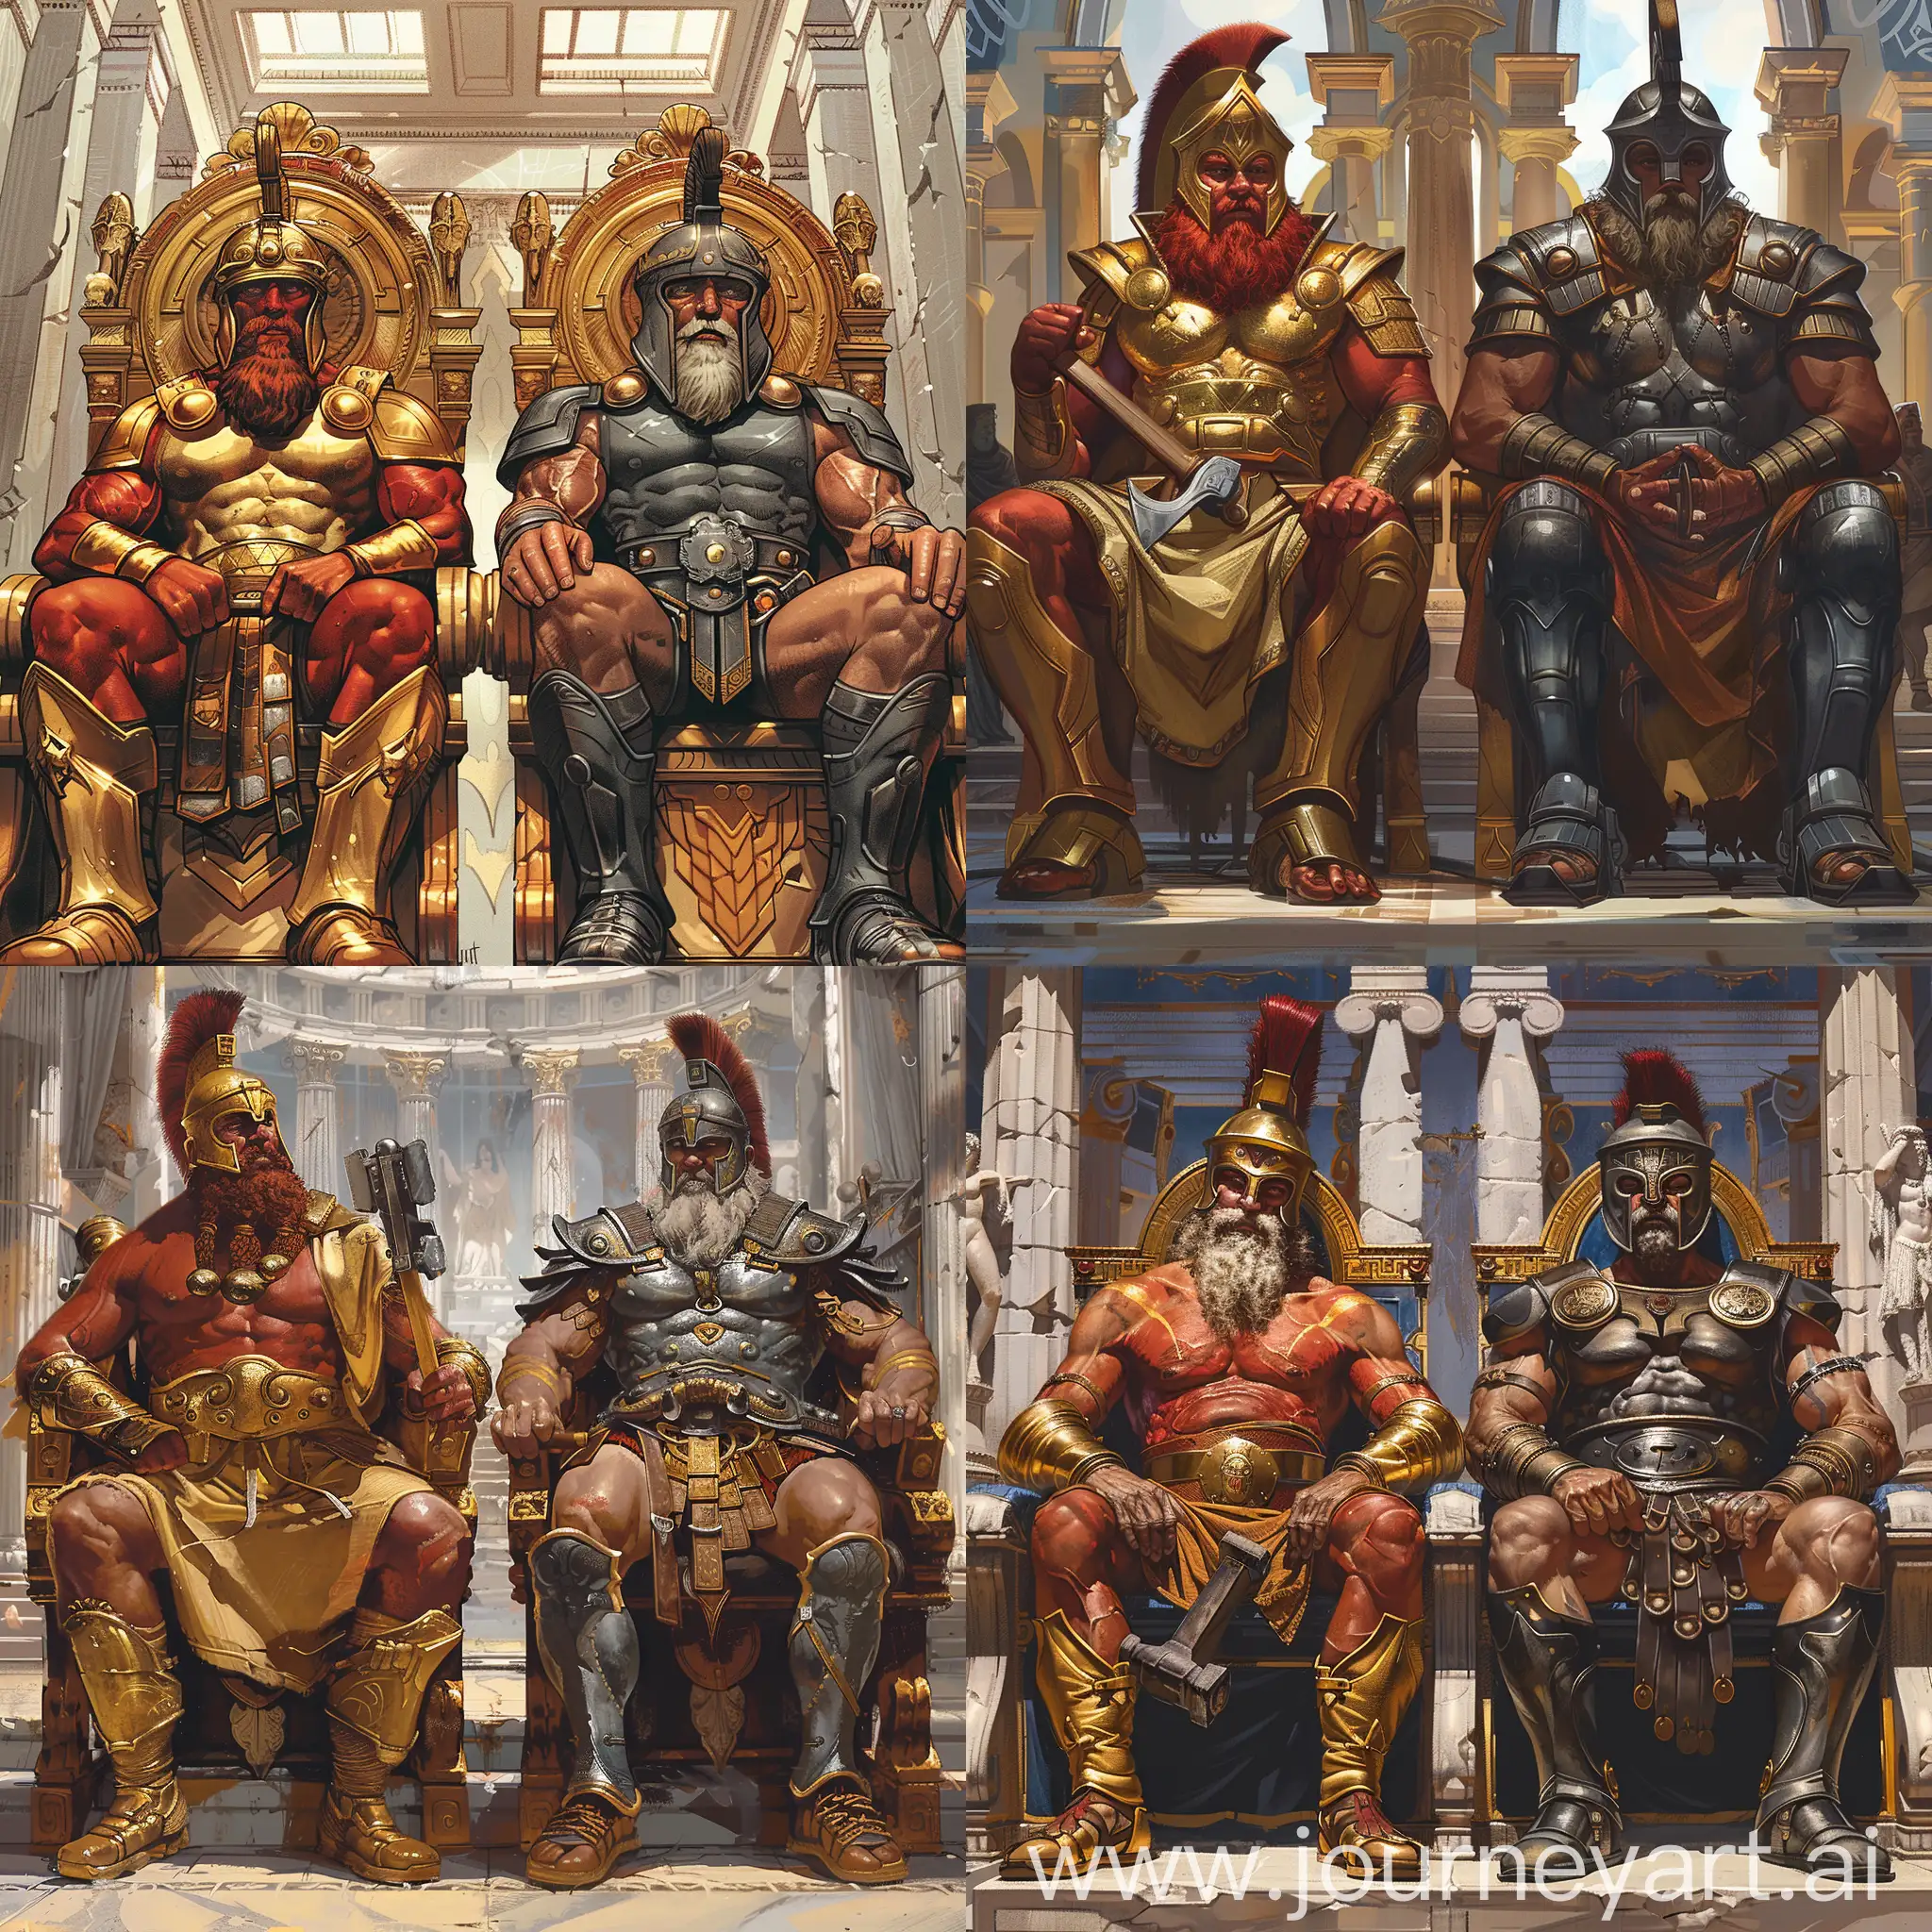 Majestic-Greek-Deities-Bearded-Vulcan-and-Ares-on-Thrones-in-a-Grand-Temple